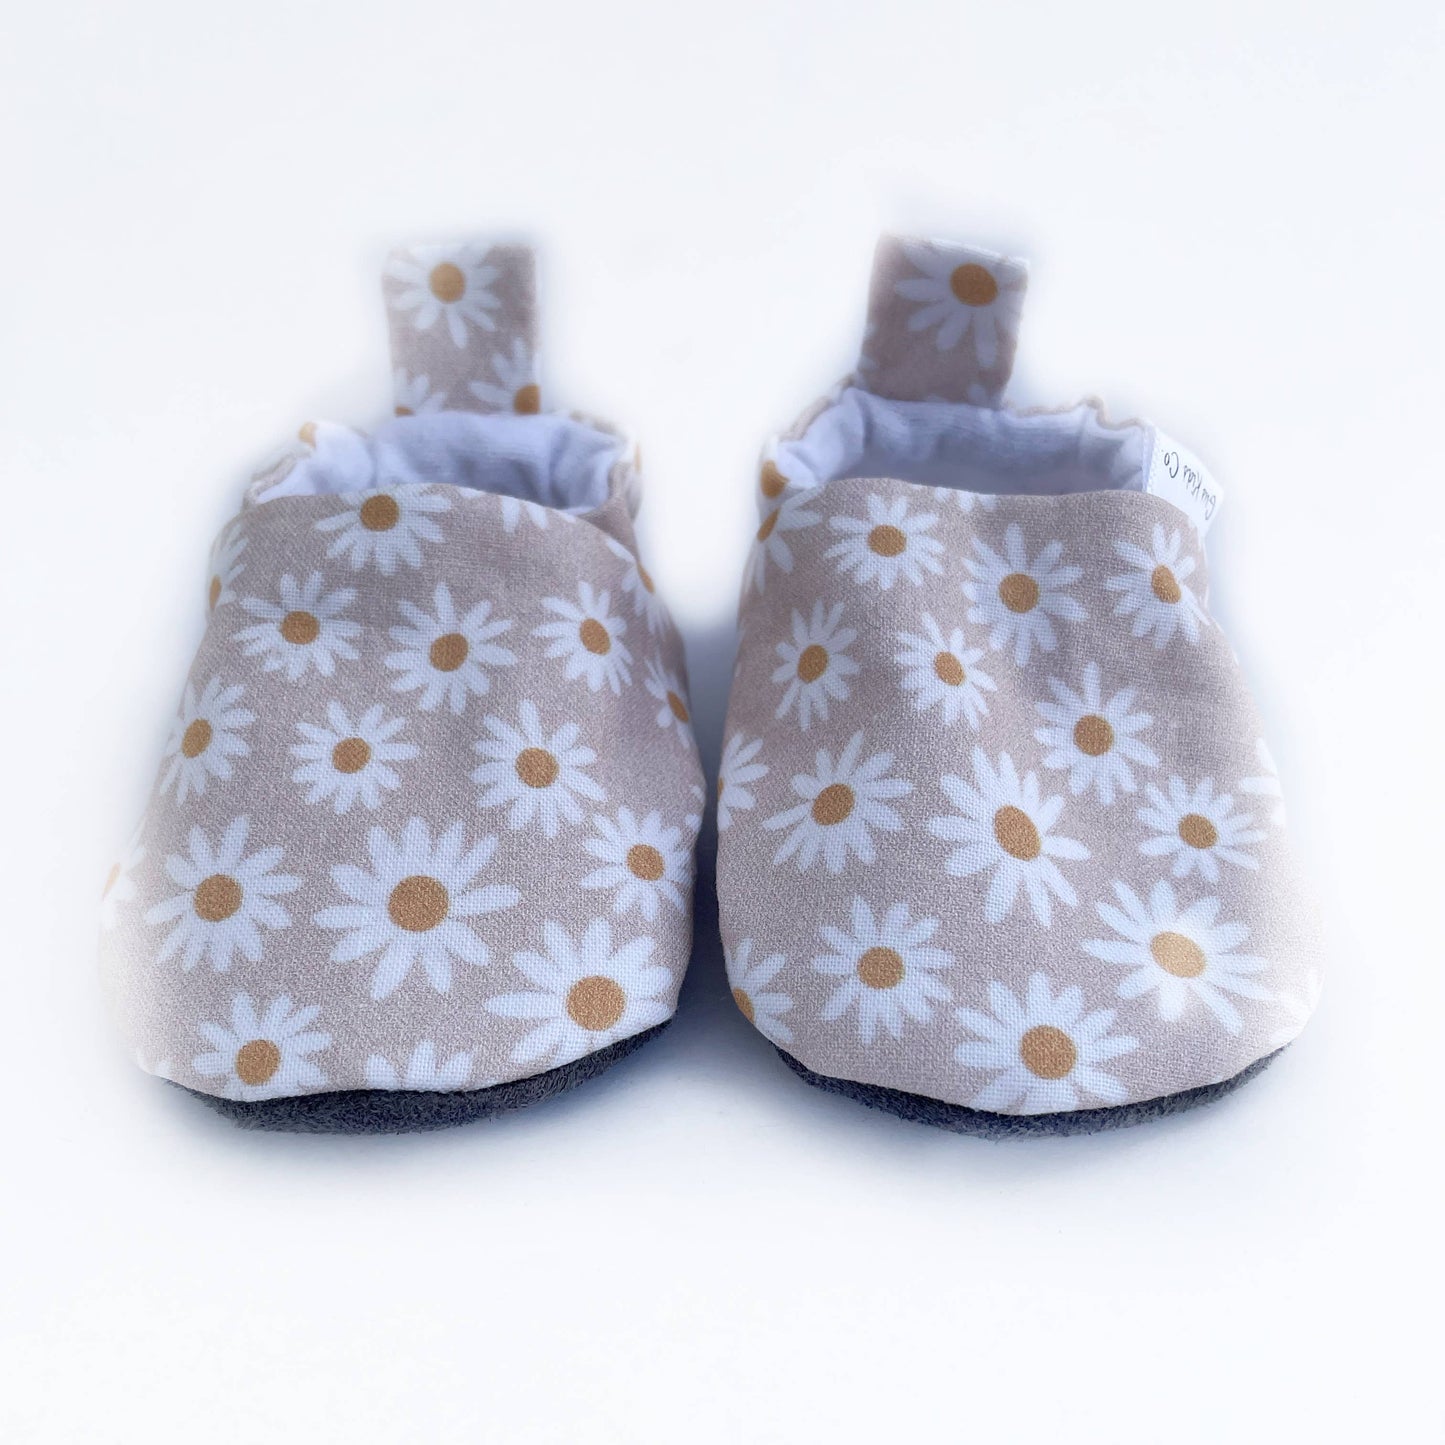 Daisy Baby Shoes: 0-3 / Faux Suede